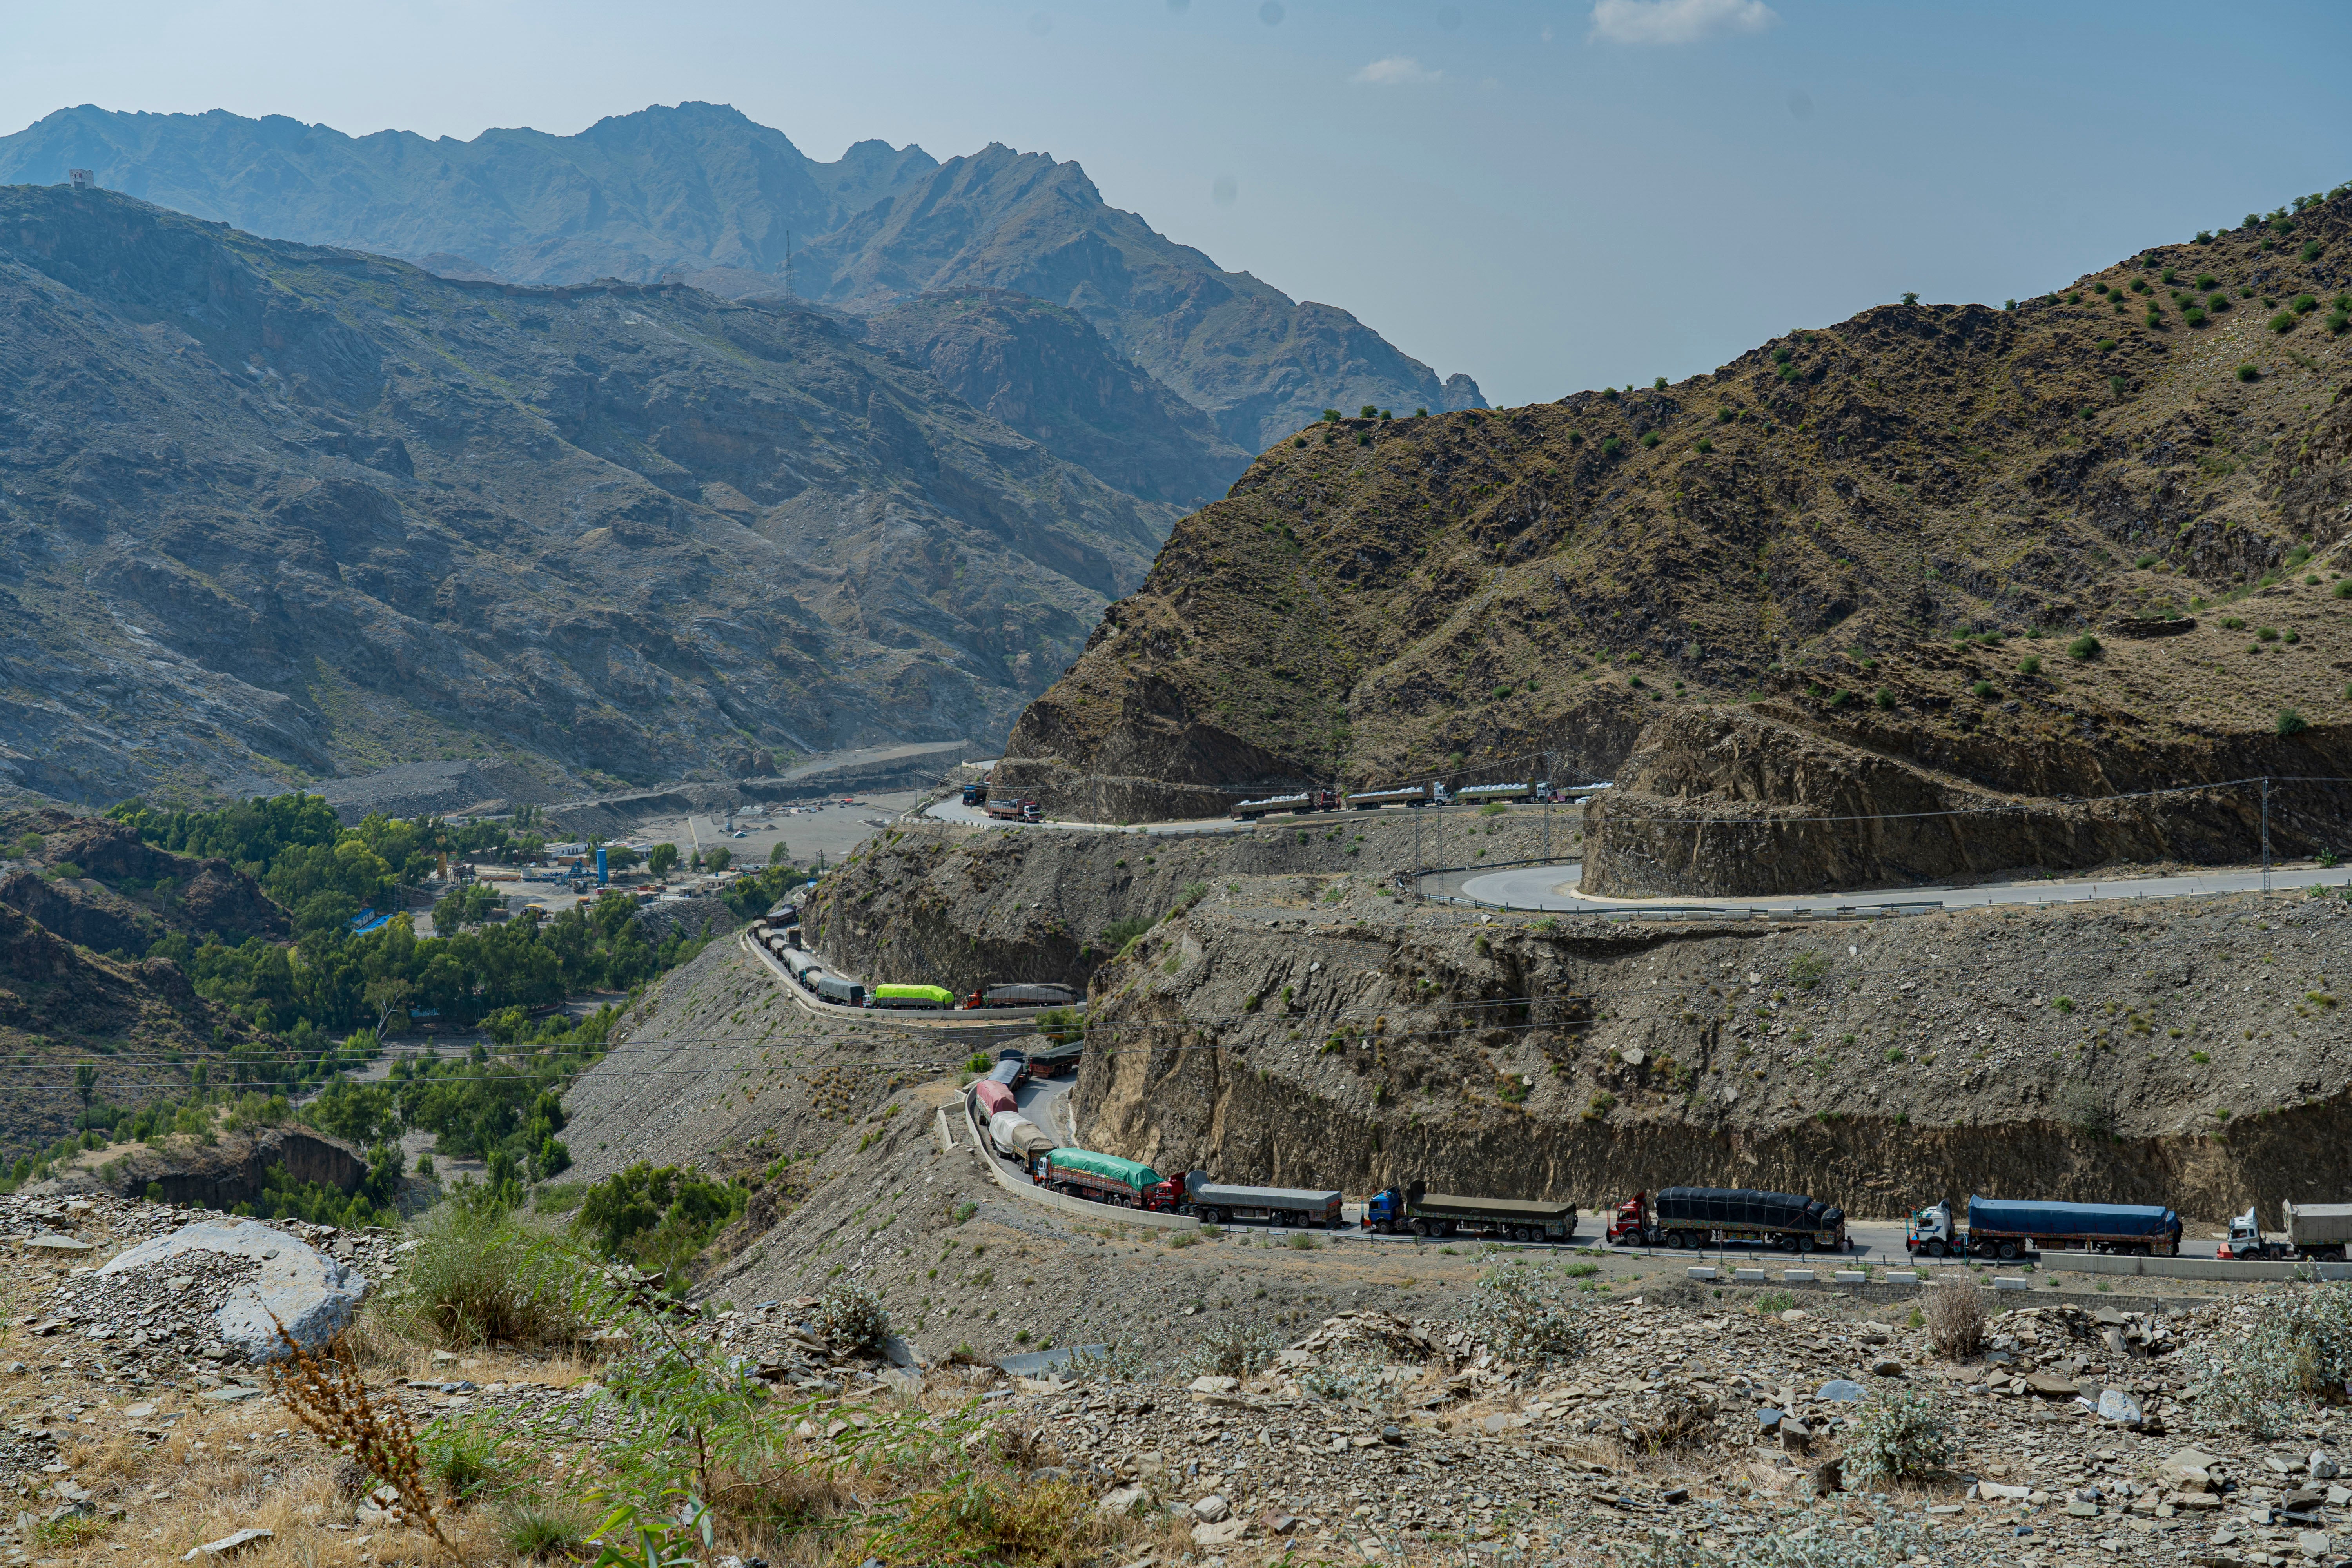 The Khyber pass where in the past containers of supplies were frequently attacked